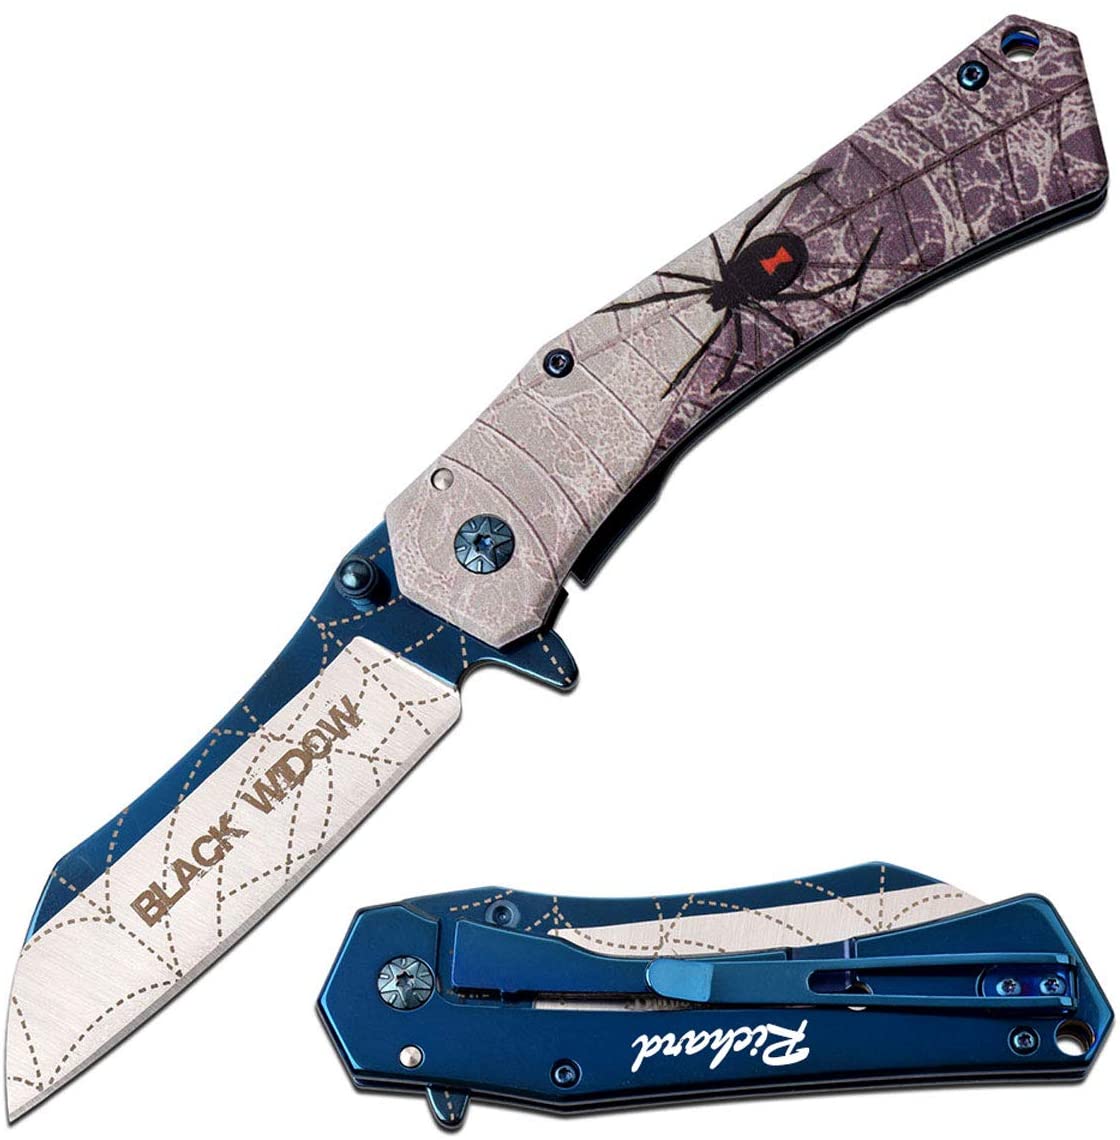 GIFTS INFINITY 7.75" Overall Black Widow Spider 3D Handle, Folding Knife Survival Knife, Blue Titanium Blade